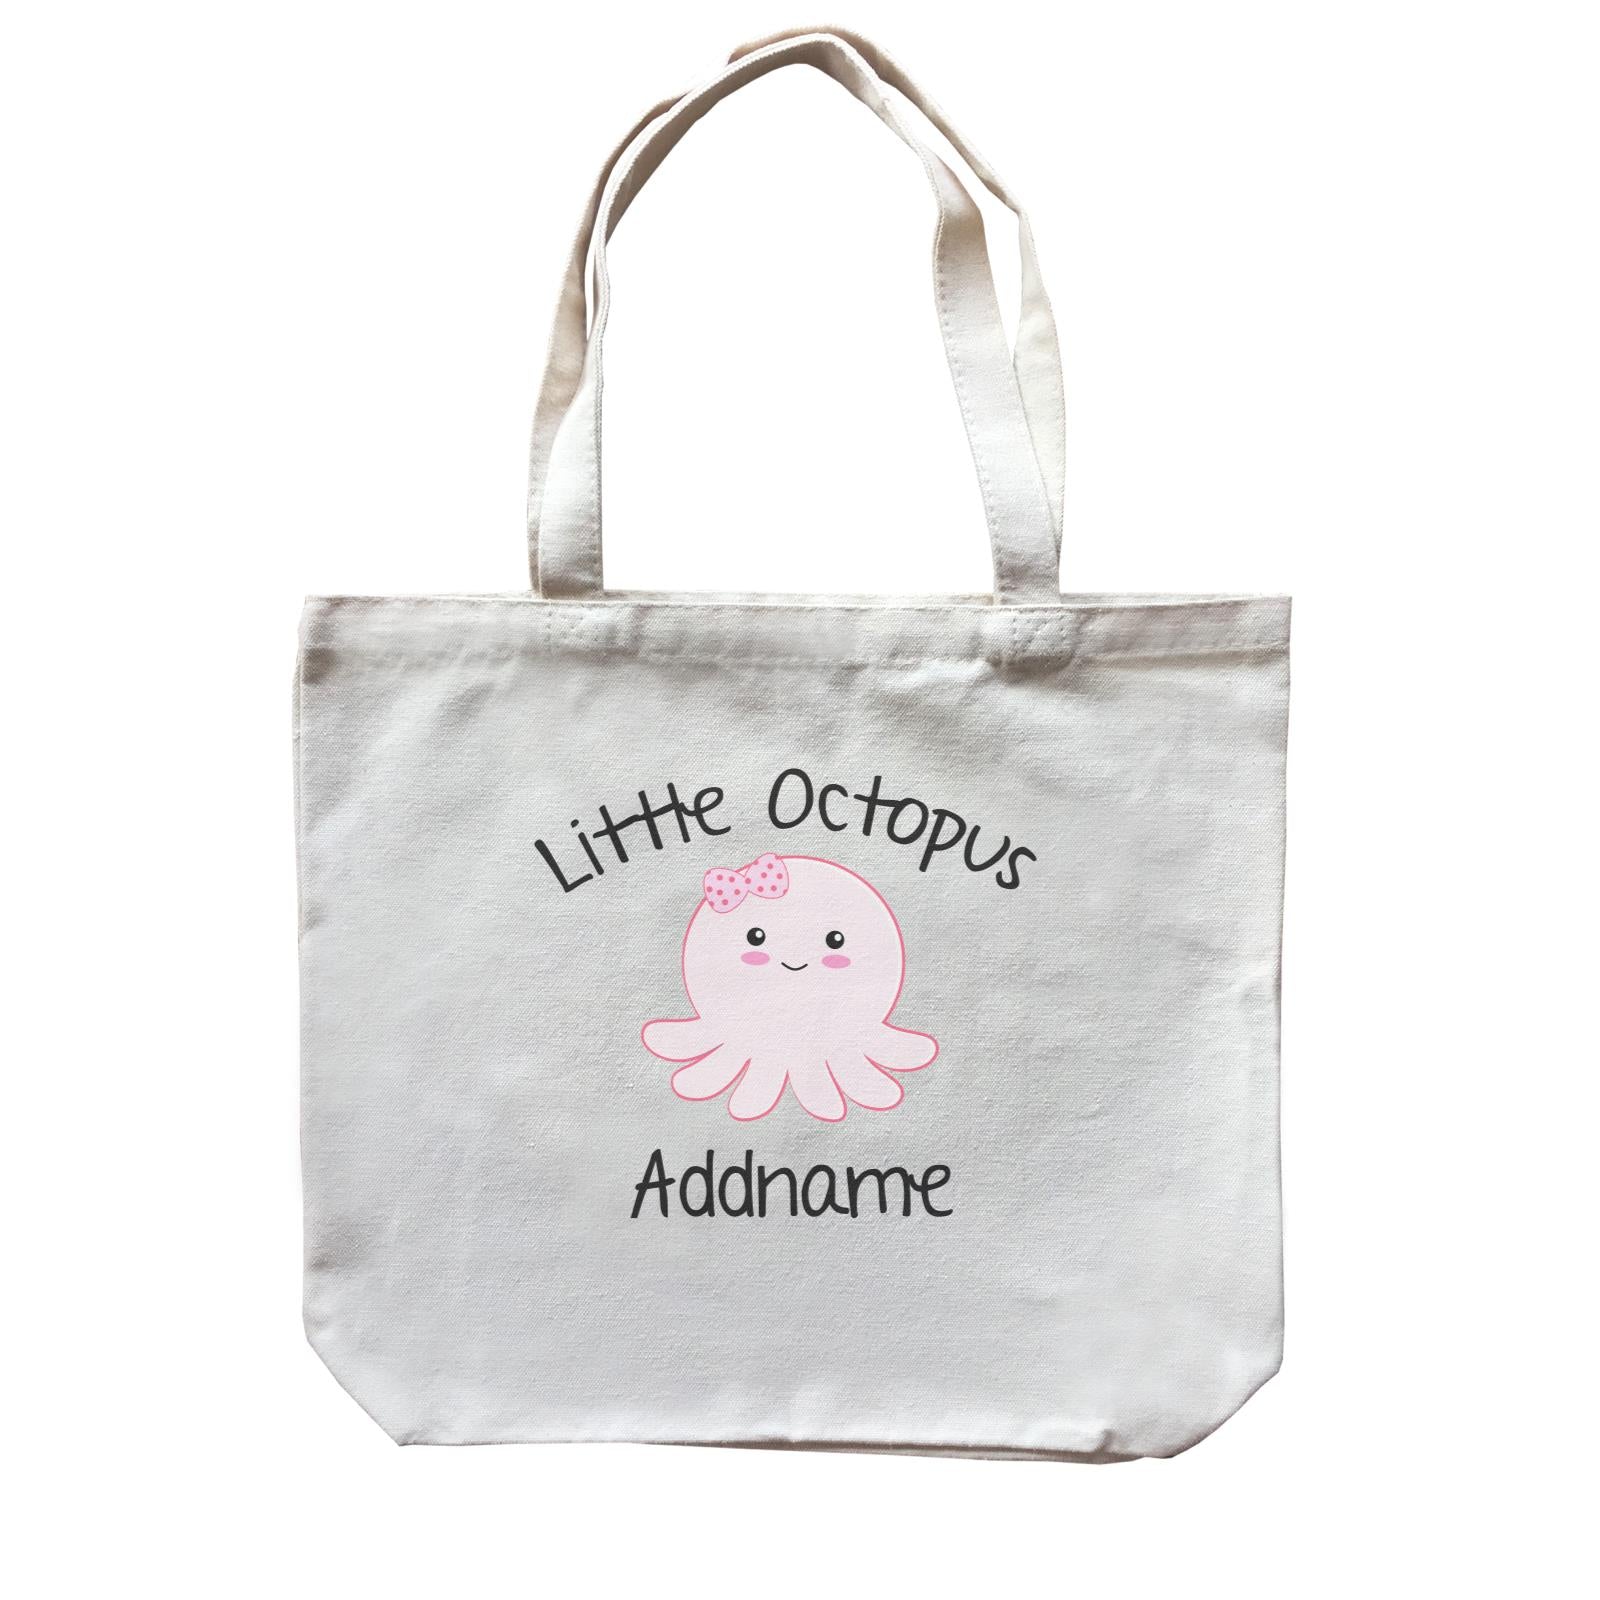 Cute Animals And Friends Series Little Octopus Girl Addname Canvas Bag